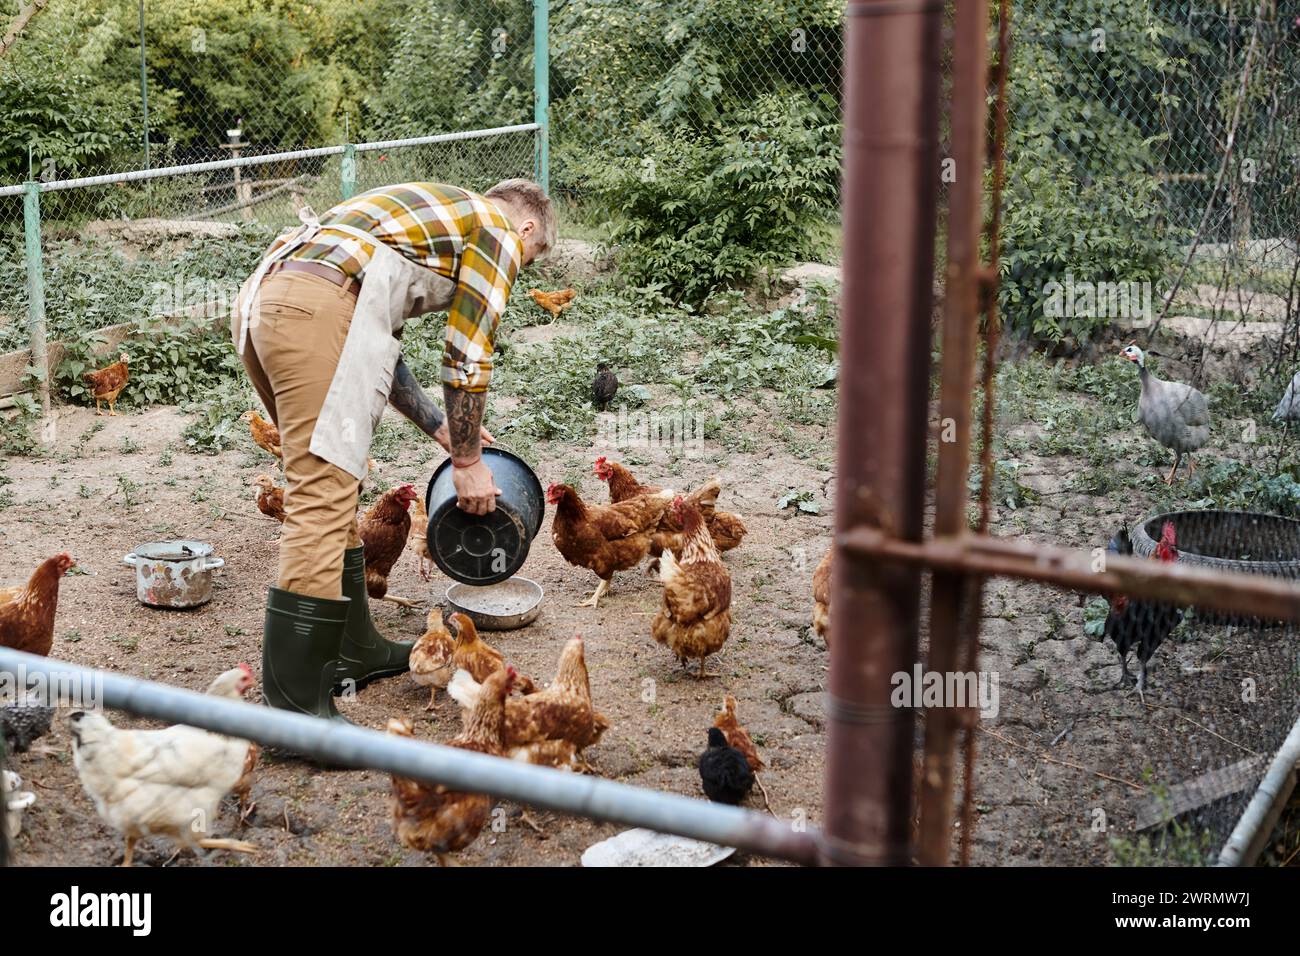 appealing hardworking man with tattoos feeding chickens in their aviary while on his farm Stock Photo